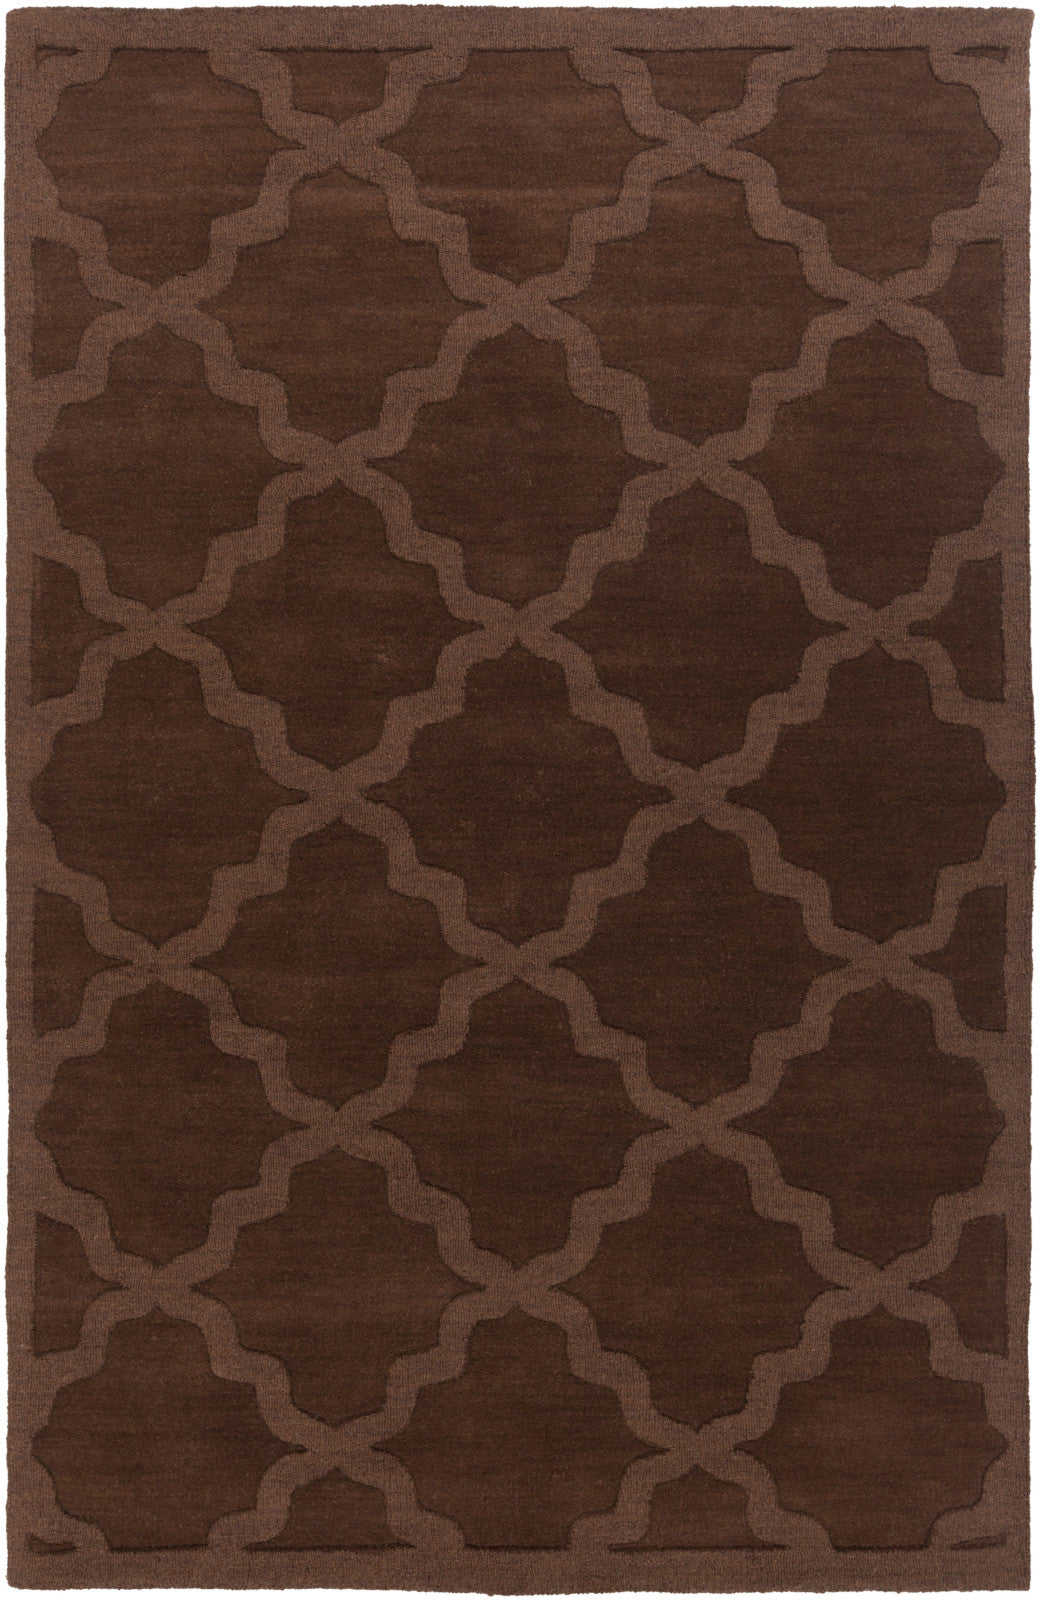 Artistic Weavers Central Park Abbey Chocolate Brown Area Rug main image